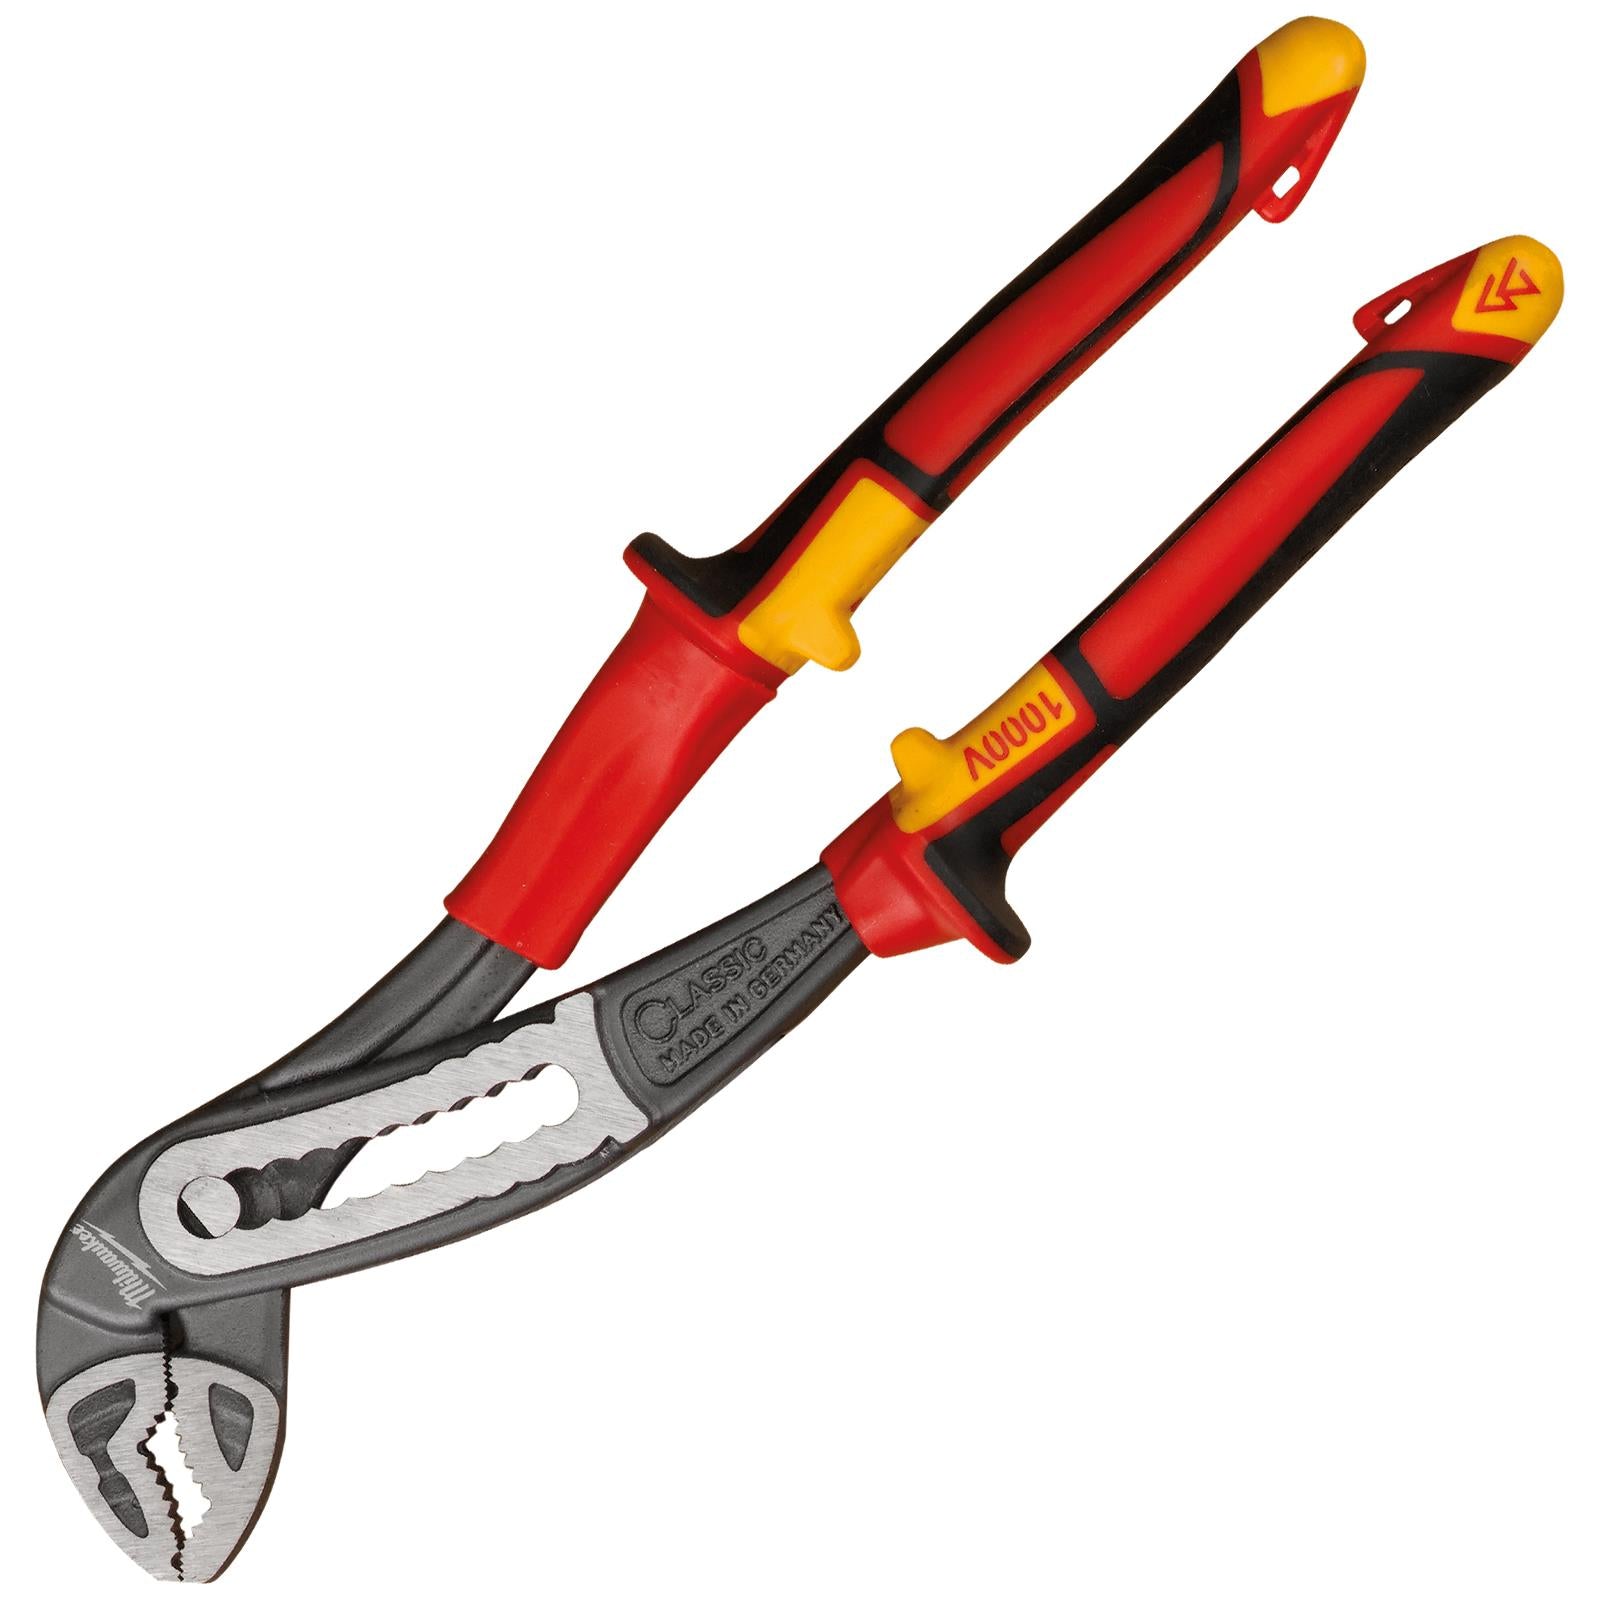 Milwaukee VDE Water Pump Pliers 240mm Insulated 10,000V